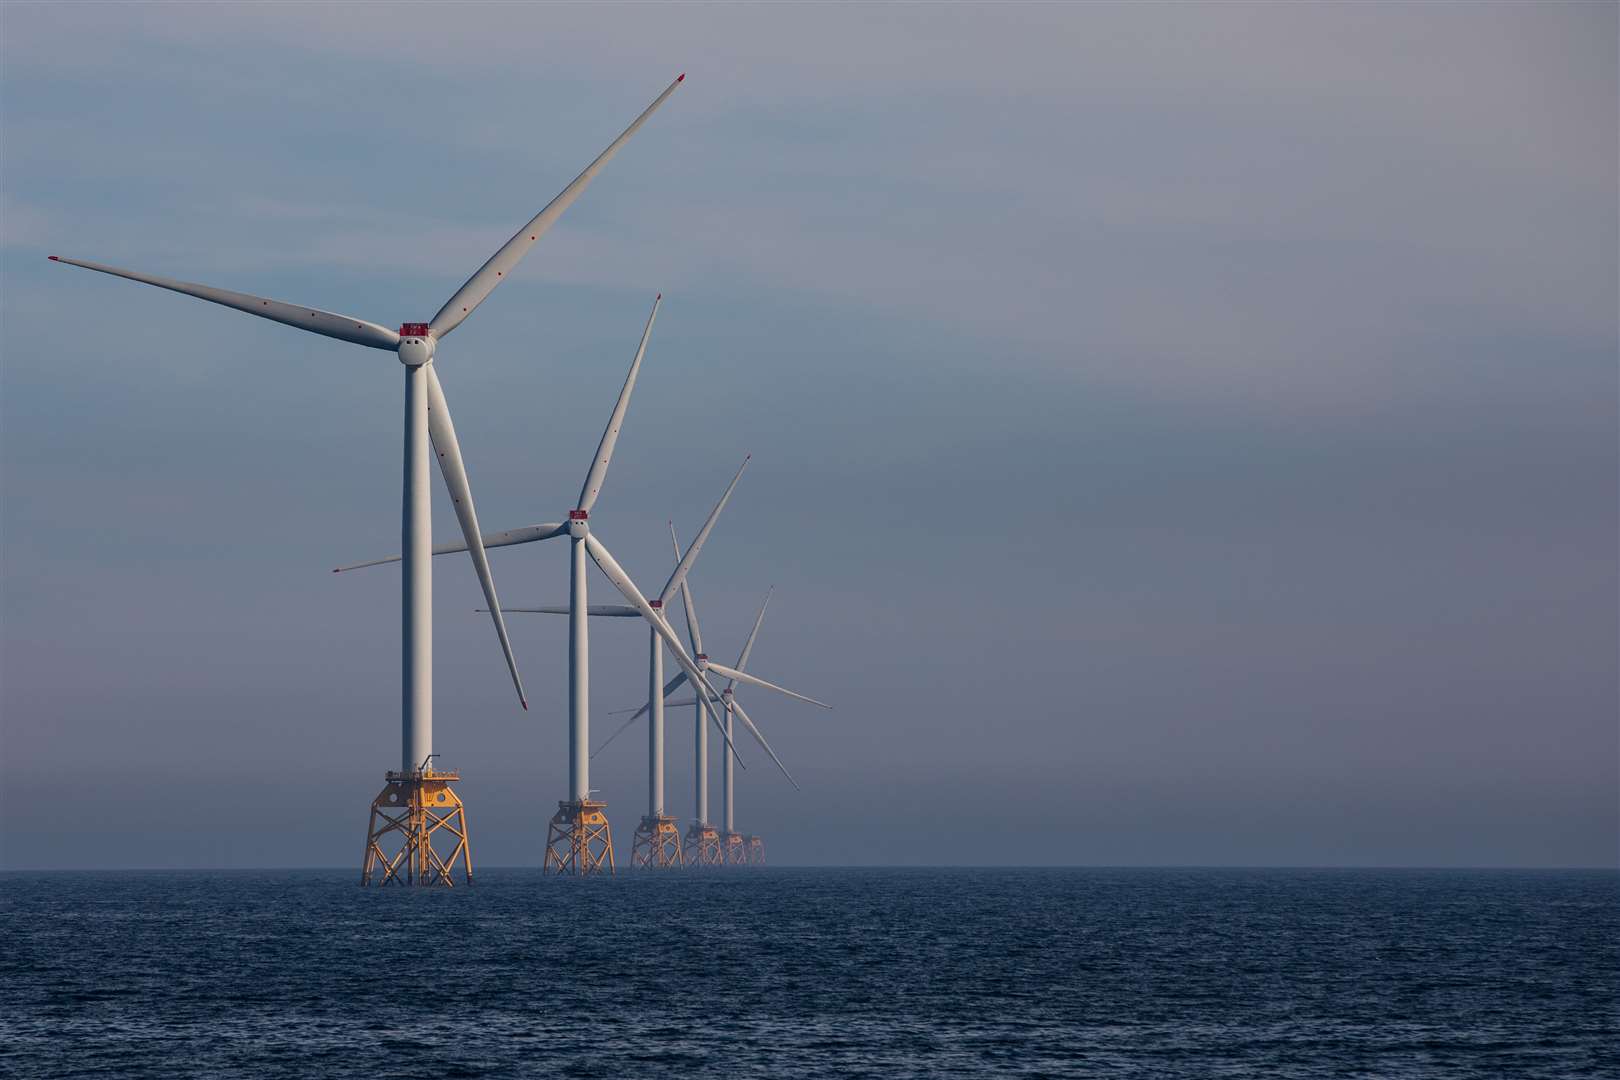 SSE Renewables Beatrice wind farm is Scotland's largest operational offshore wind farm and is capable of providing enough wind powered electricity for up to 450,000 homes.